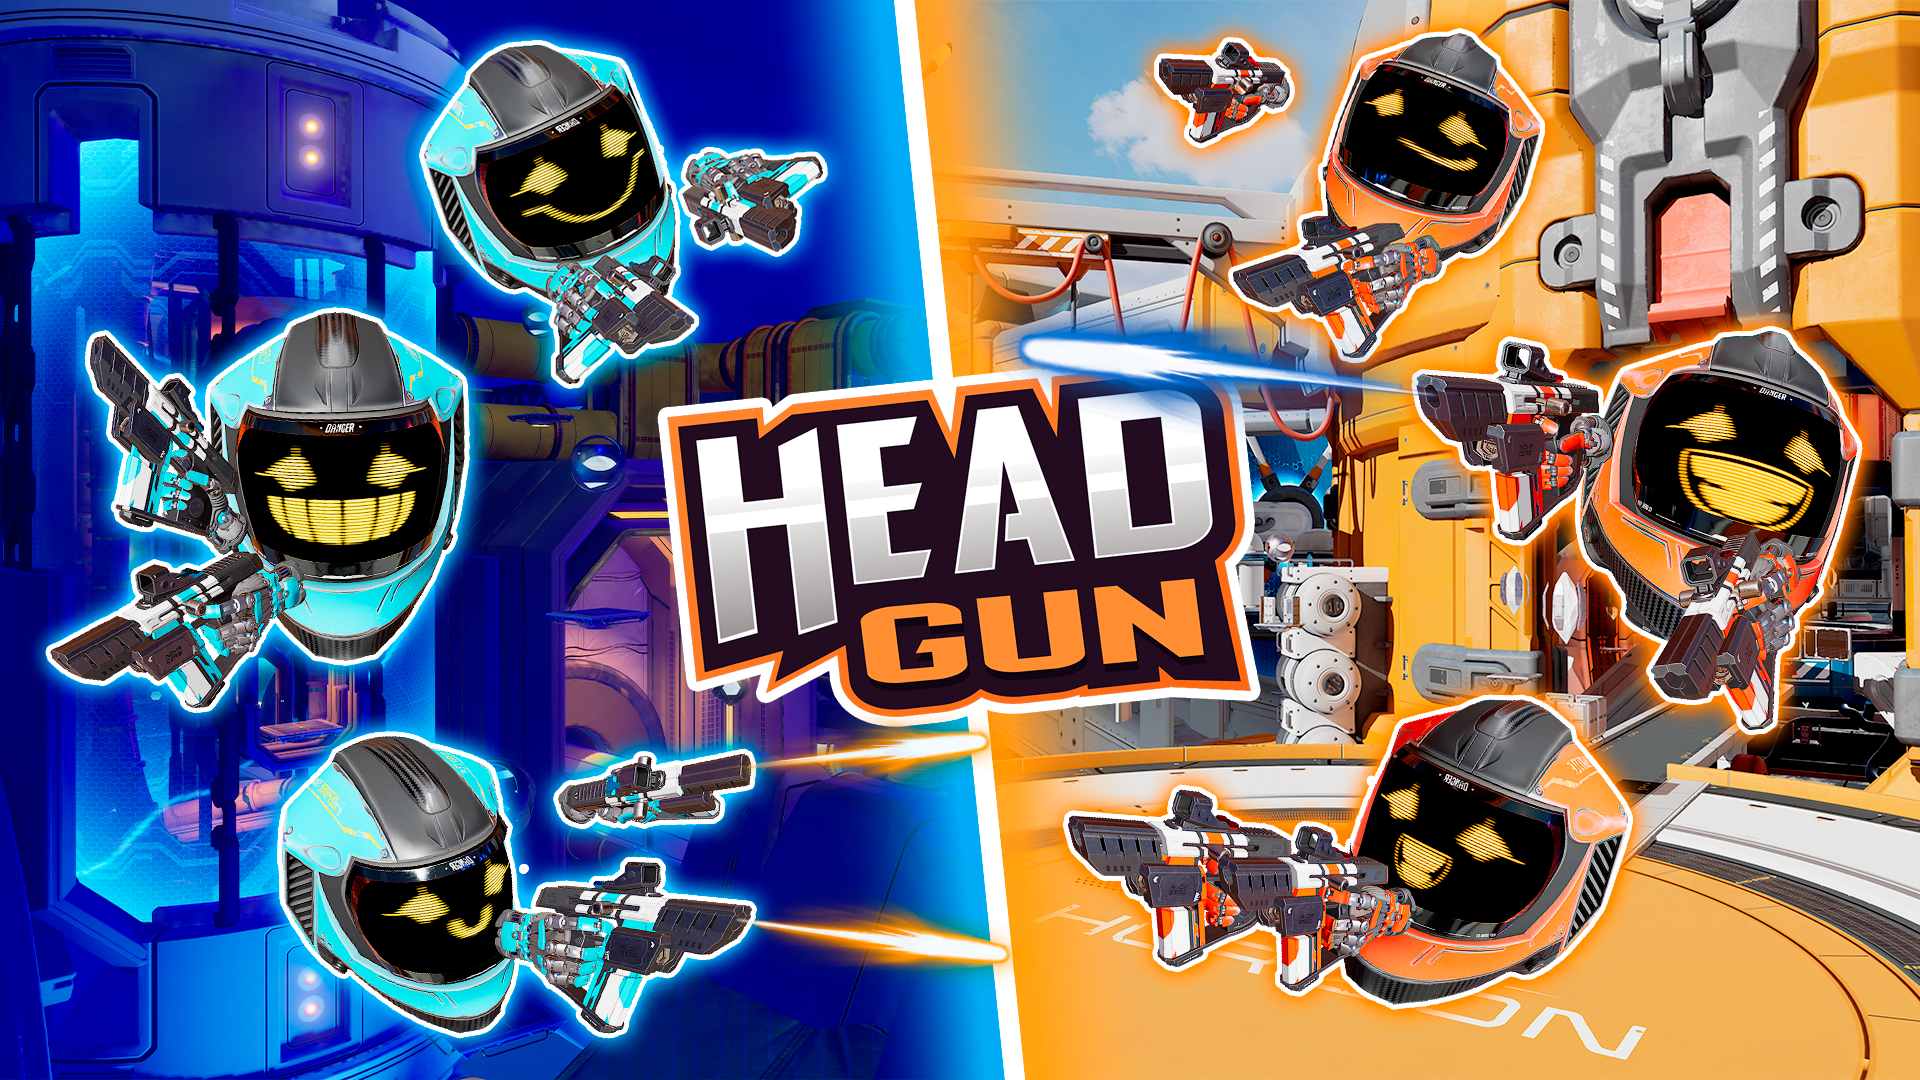 Take control over a technological robohead: use your guns to move between platforms, shoot your enemies and capture the flag! Four different maps. Three game modes.